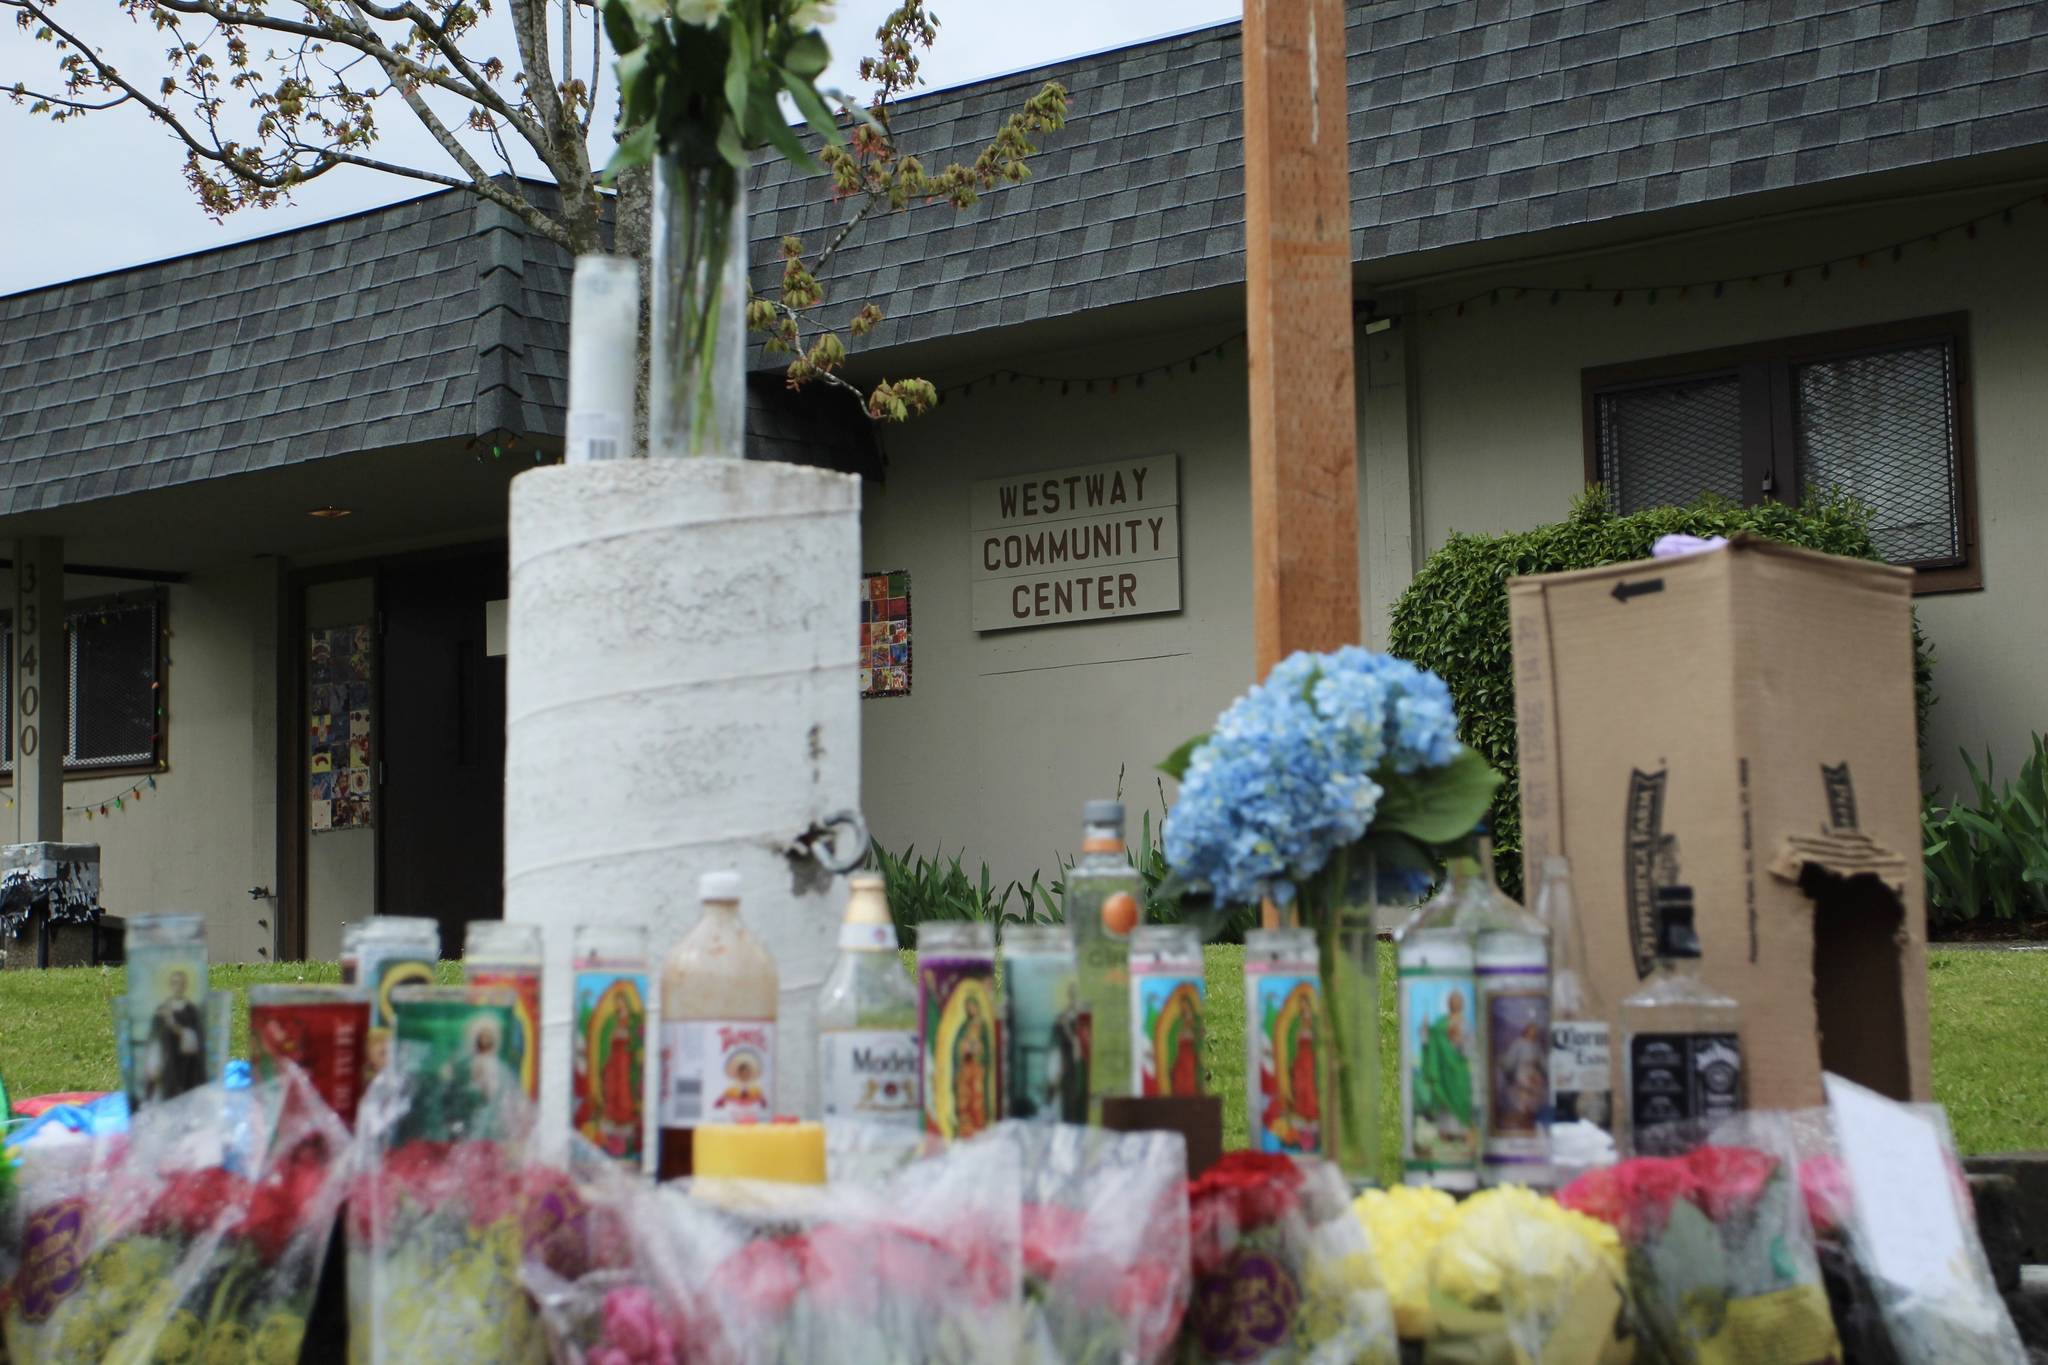 A memorial for 19-year-old Damien Helmbrecht is placed outside of the Westway Community Center on April 23. The Westway neighborhood has been the location of two homicides within eight days this month. Olivia Sullivan/staff photo